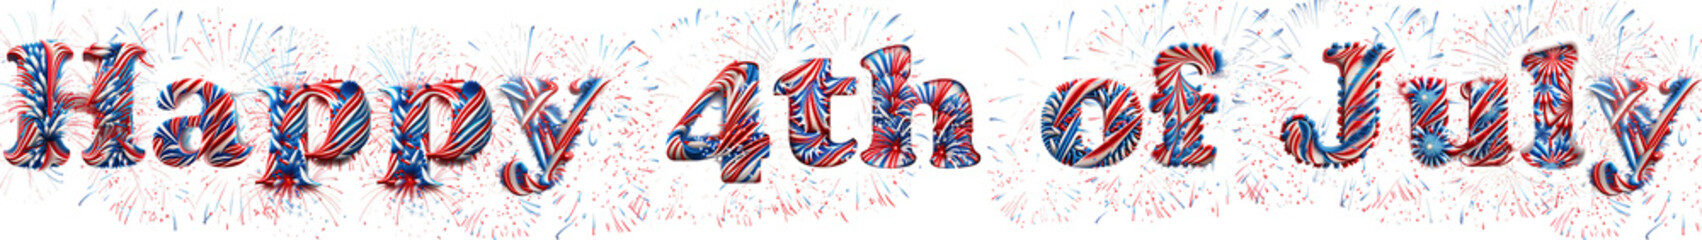 July 4th text graphics in red, white and blue fireworks.